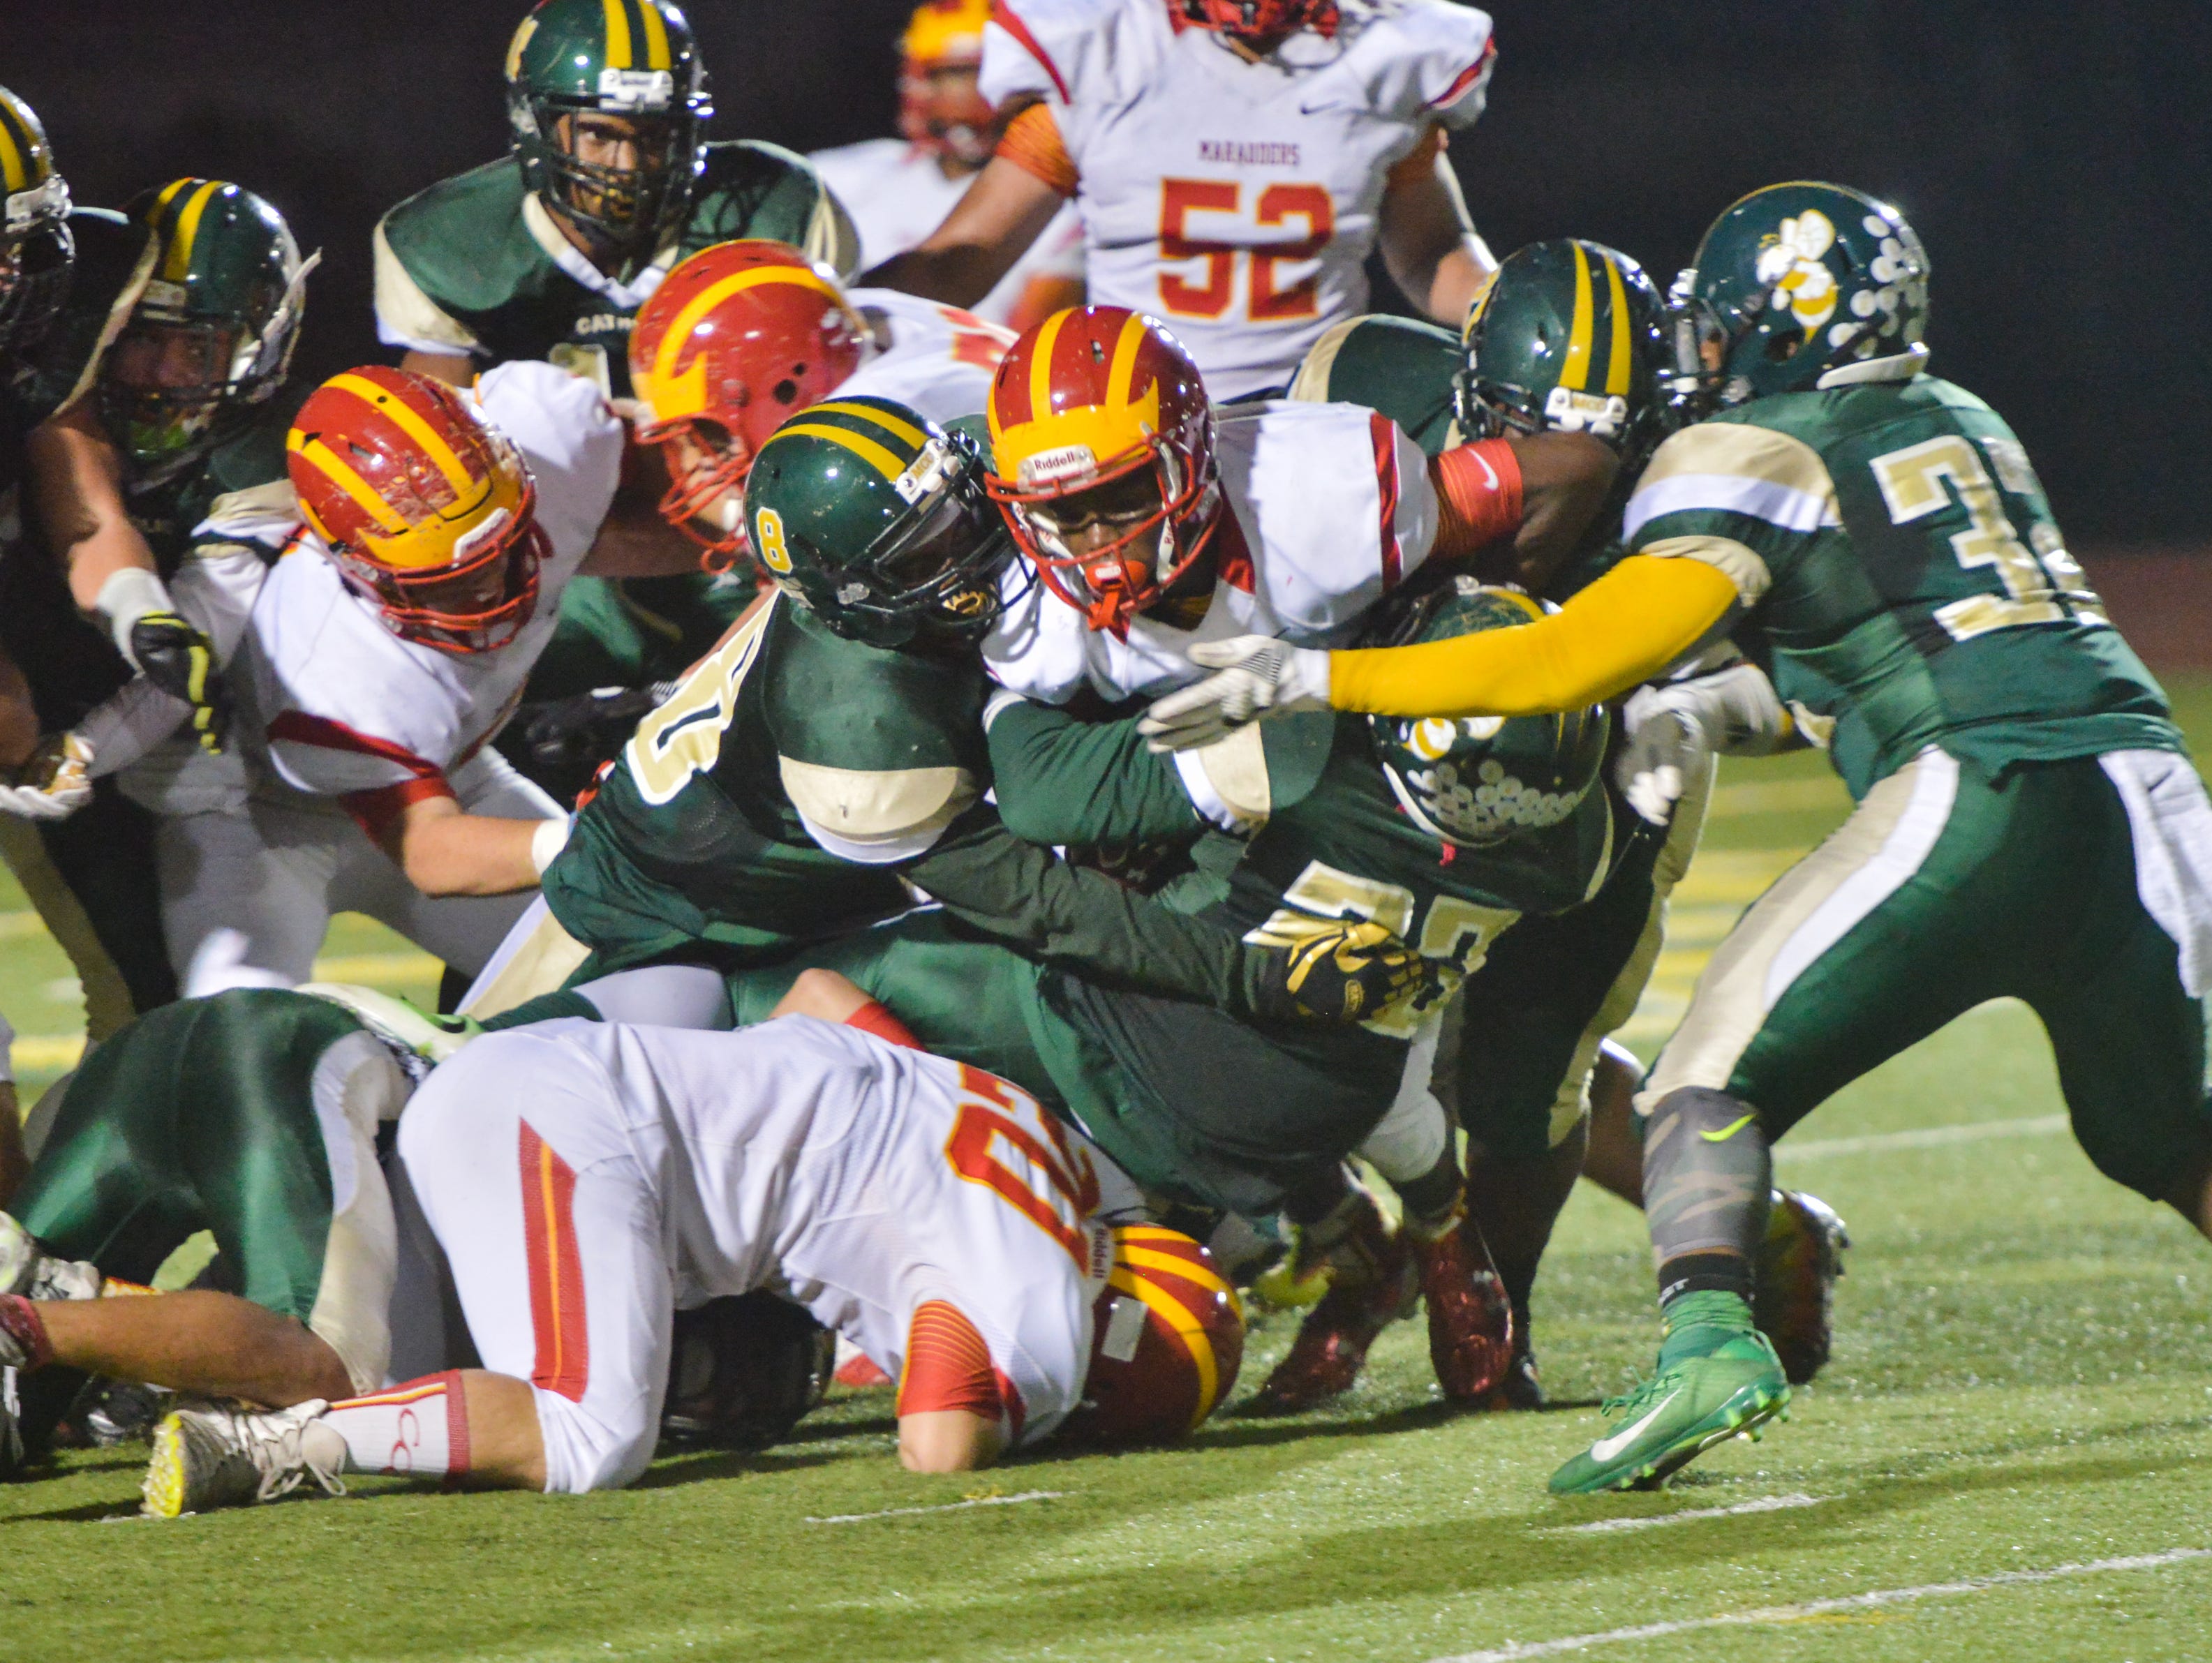 The Melbourne Central Catholic defense stops Clearwater Central Catholic from scoring on a fourth down during the second quarter.